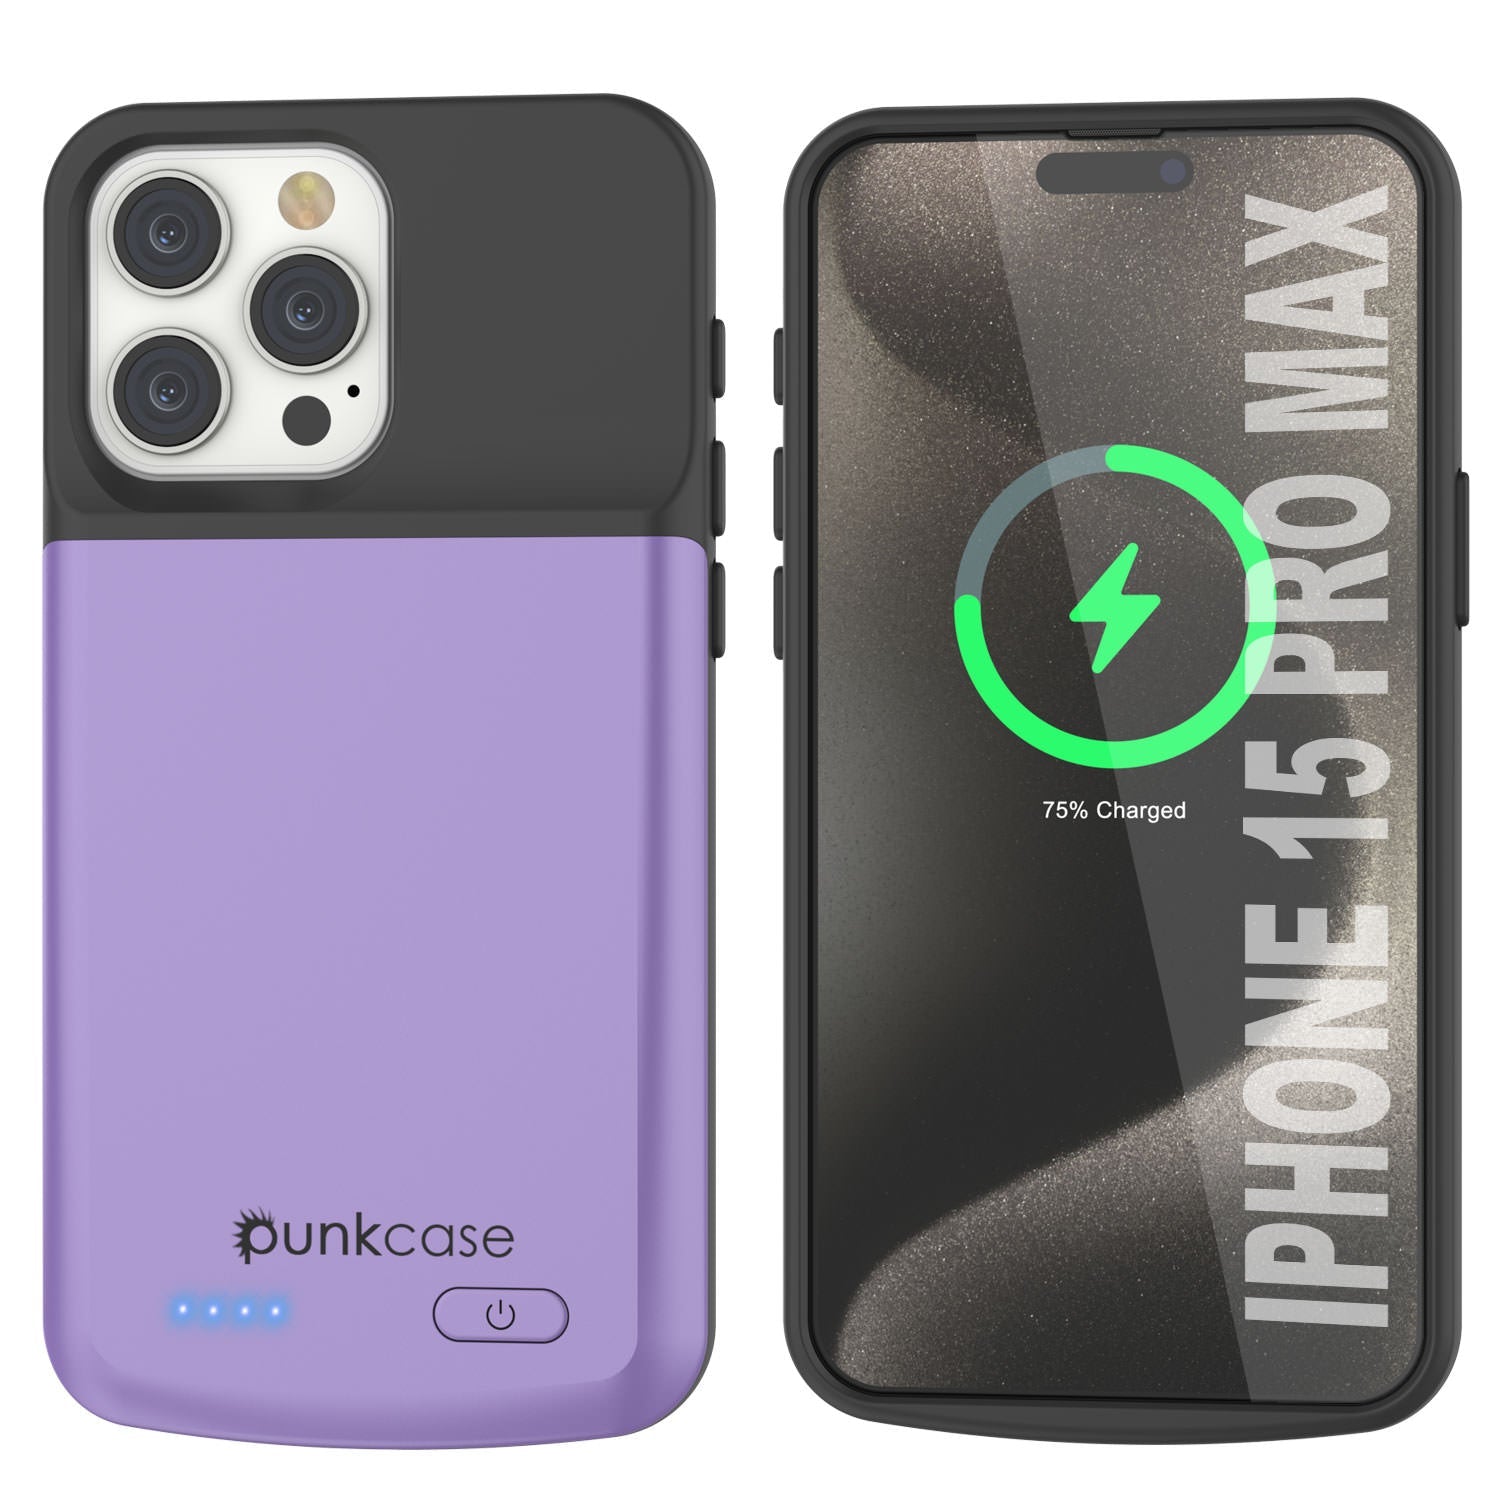 iPhone 15 Pro Max Battery Case, PunkJuice 5000mAH Fast Charging Power Bank W/ Screen Protector | [Purple]